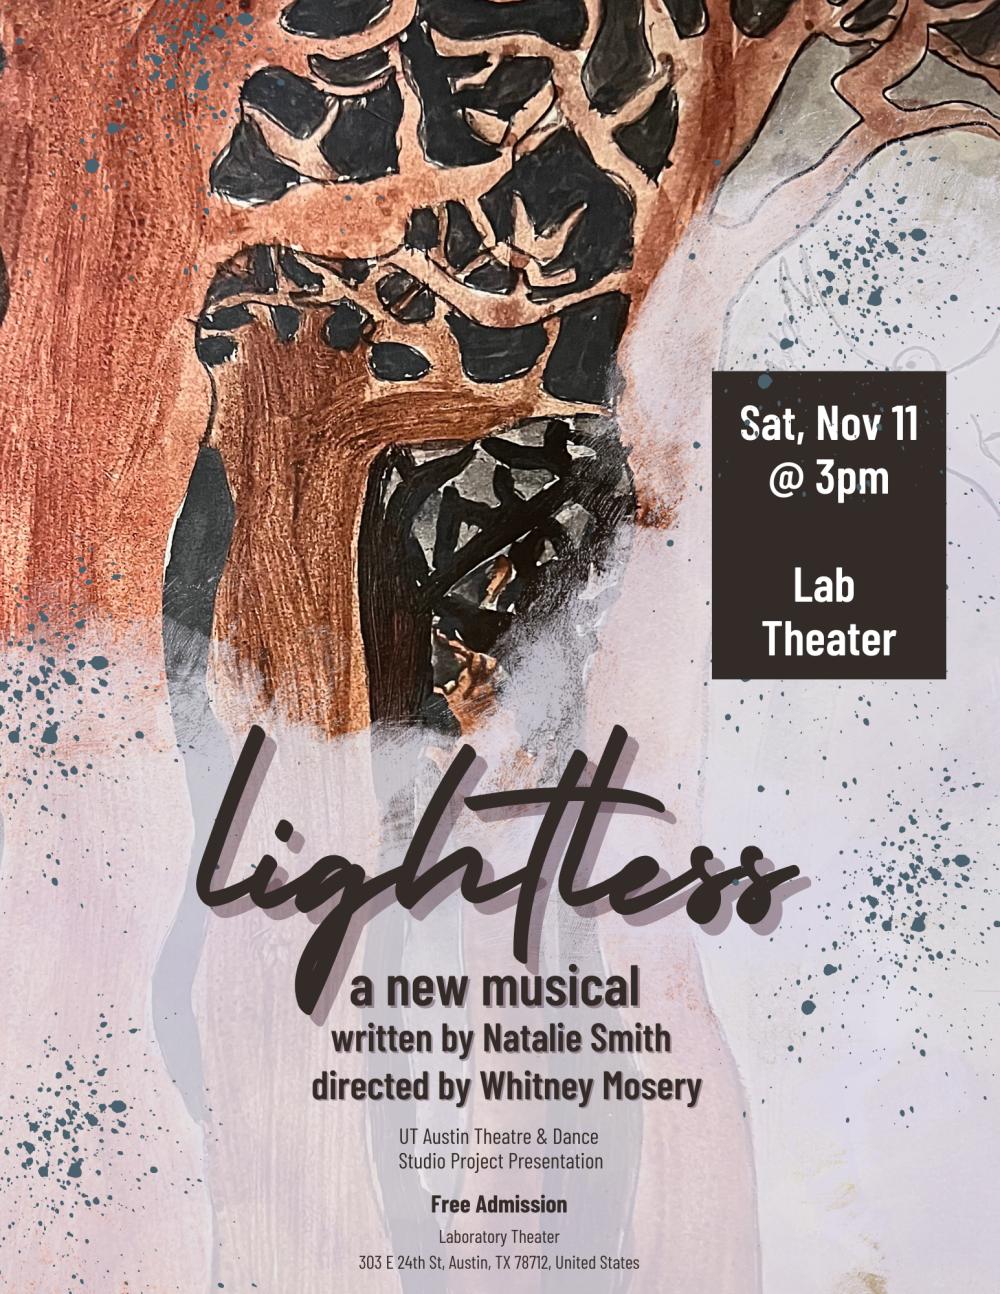 A flier for LIGHTLESS, a new musical presented on Saturday, November 11, featuring ominous looking trees drawn and painted